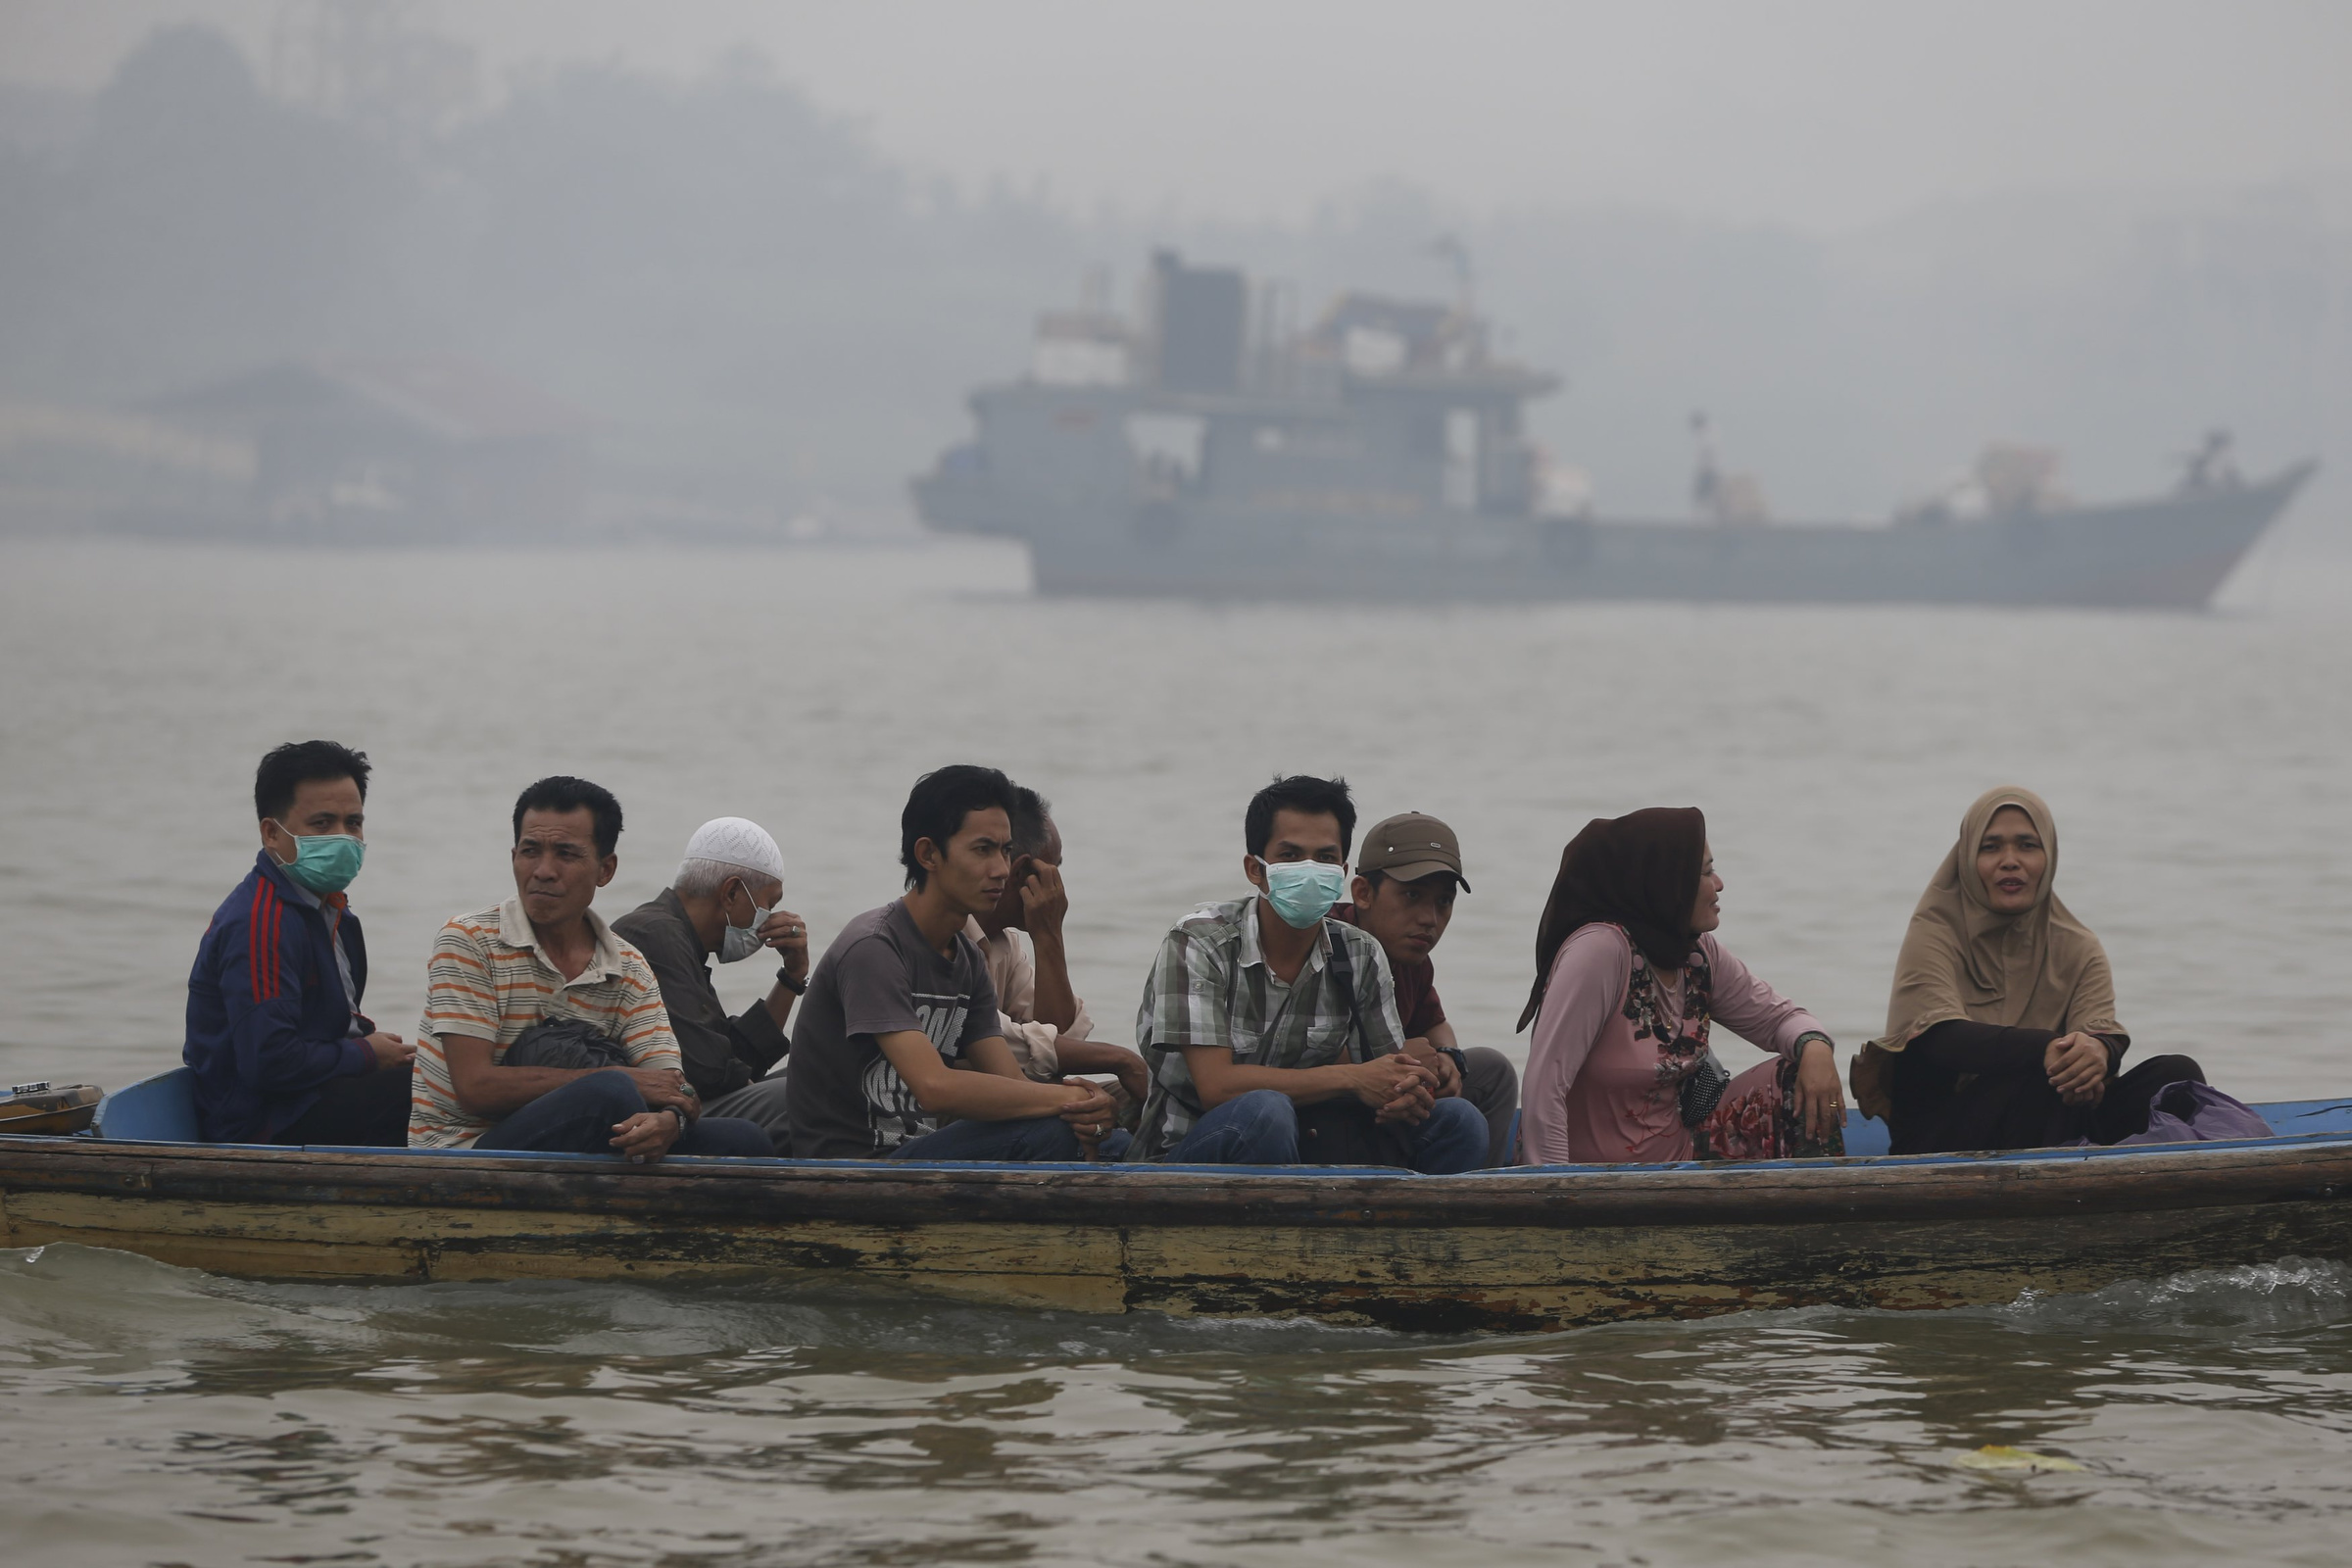 People cross the Batanghari River in Jambi, Indonesia, Sept. 14, while breathing unhealthy air caused by slash-and-burn deforestation. (CNS/Beawiharta, Reuters)